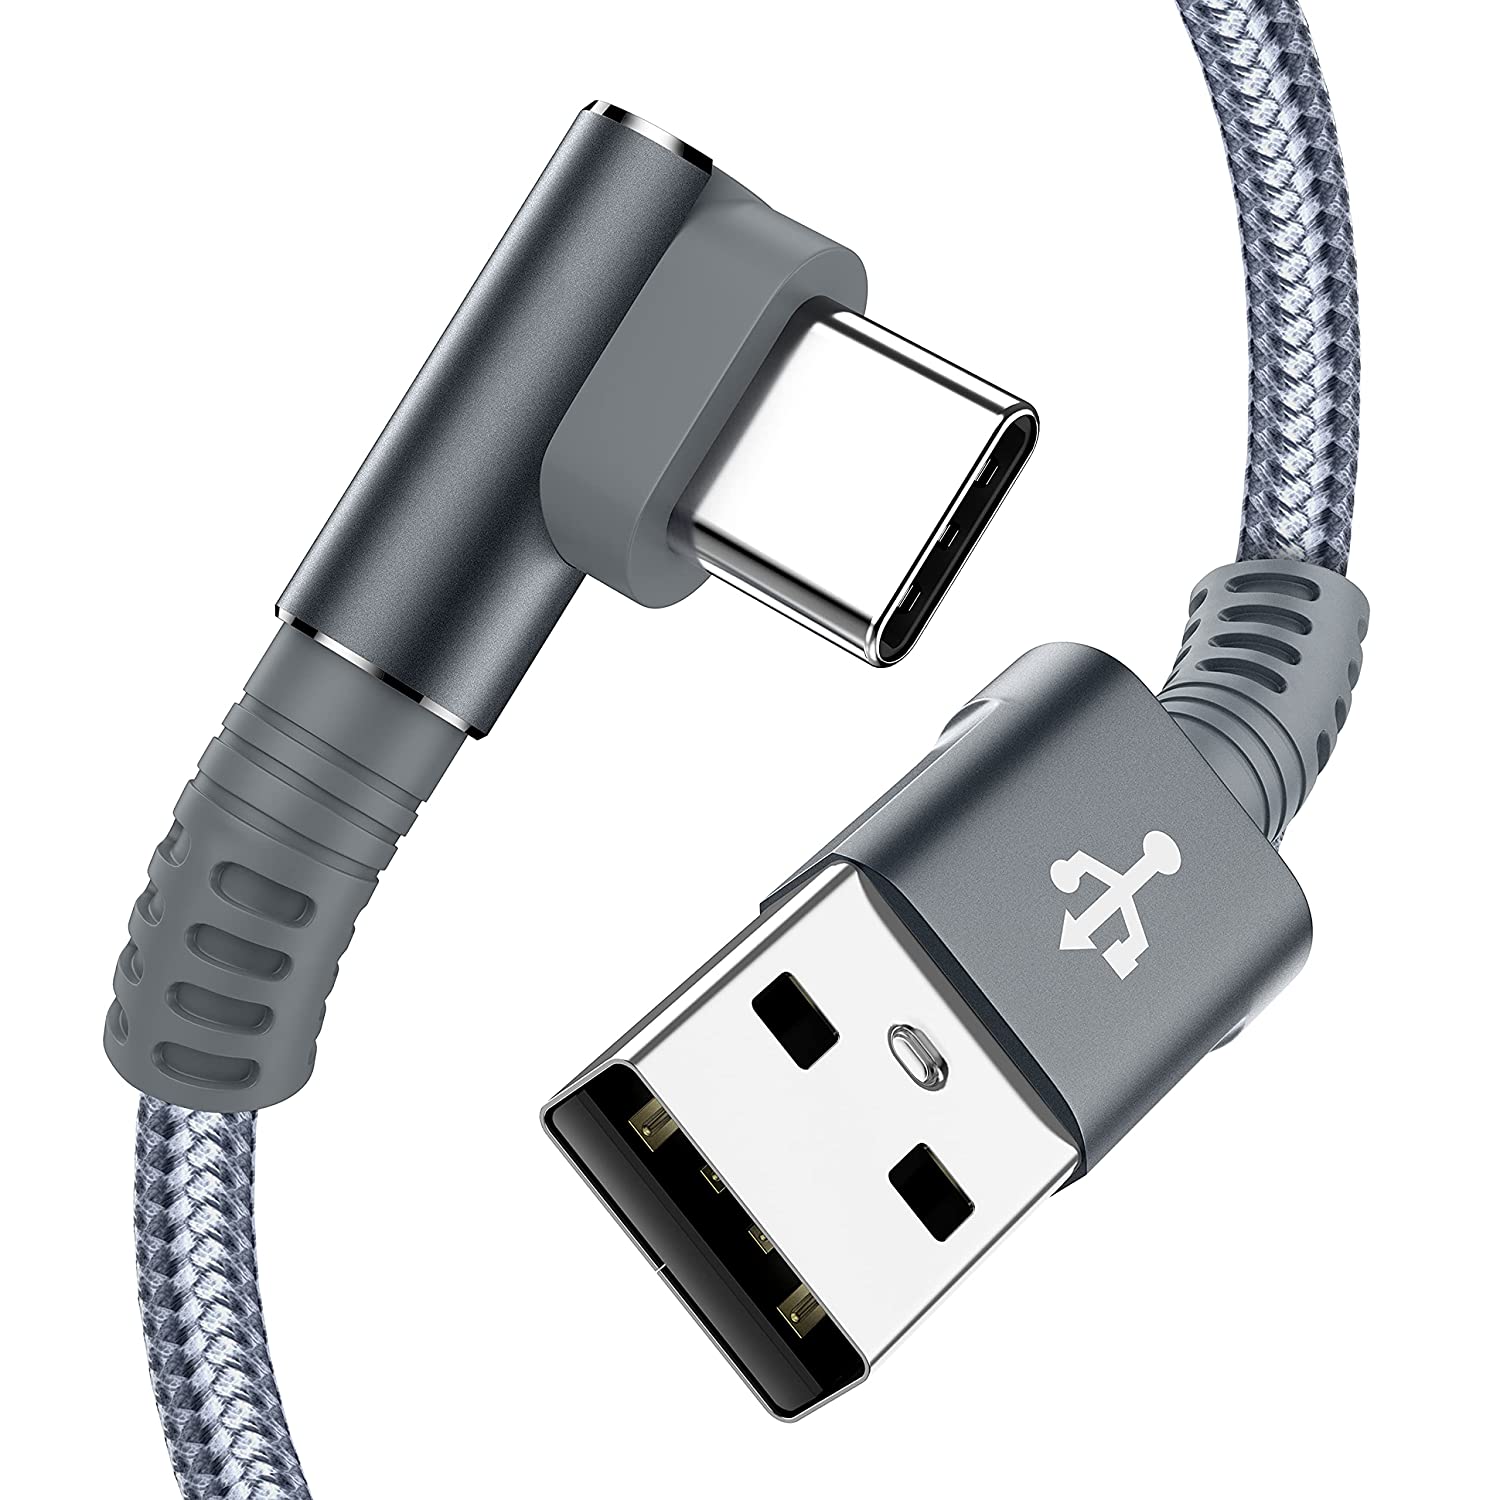 6FT Quick Charging, Durable Nylon Braided Charger Cable for iPad, Samsung, Google Pixel, Nexus and More ! Amazon Stocking Stuffers | Stocking stuffers For Adults | stocking stuffers for men | mens stocking stuffers | Stocking stuffers for her | Stocking stuffers for guys | Cheap stocking stuffers | Best stocking stuffers | Stocking stuffers for wife | stocking stuffer gifts | Best stocking stuffers